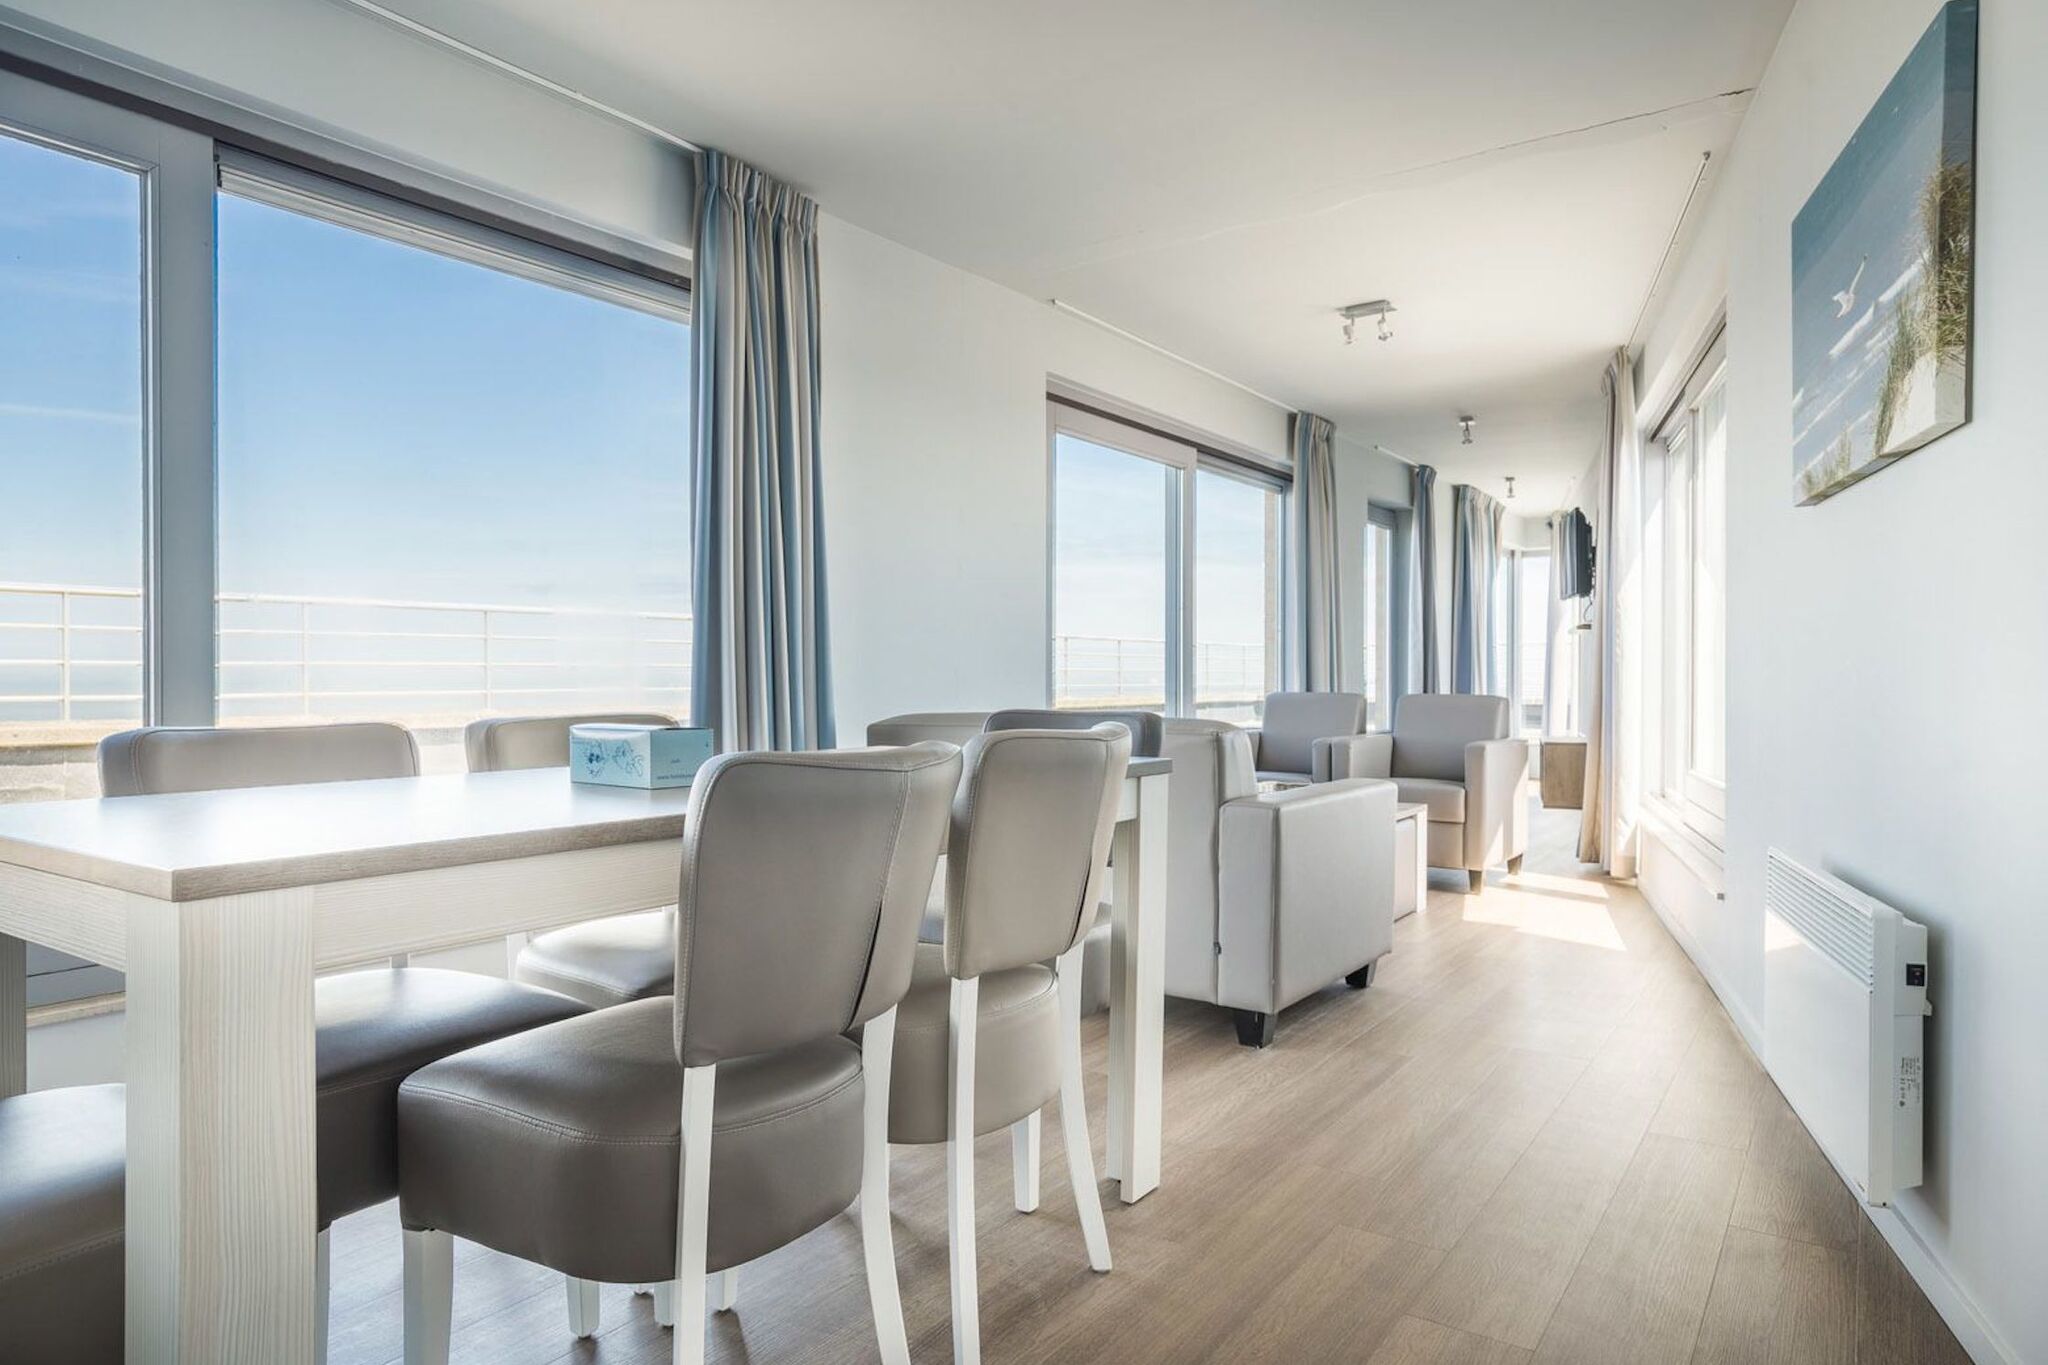 Beautiful penthouse with phenomenal sea view in Blankenberge